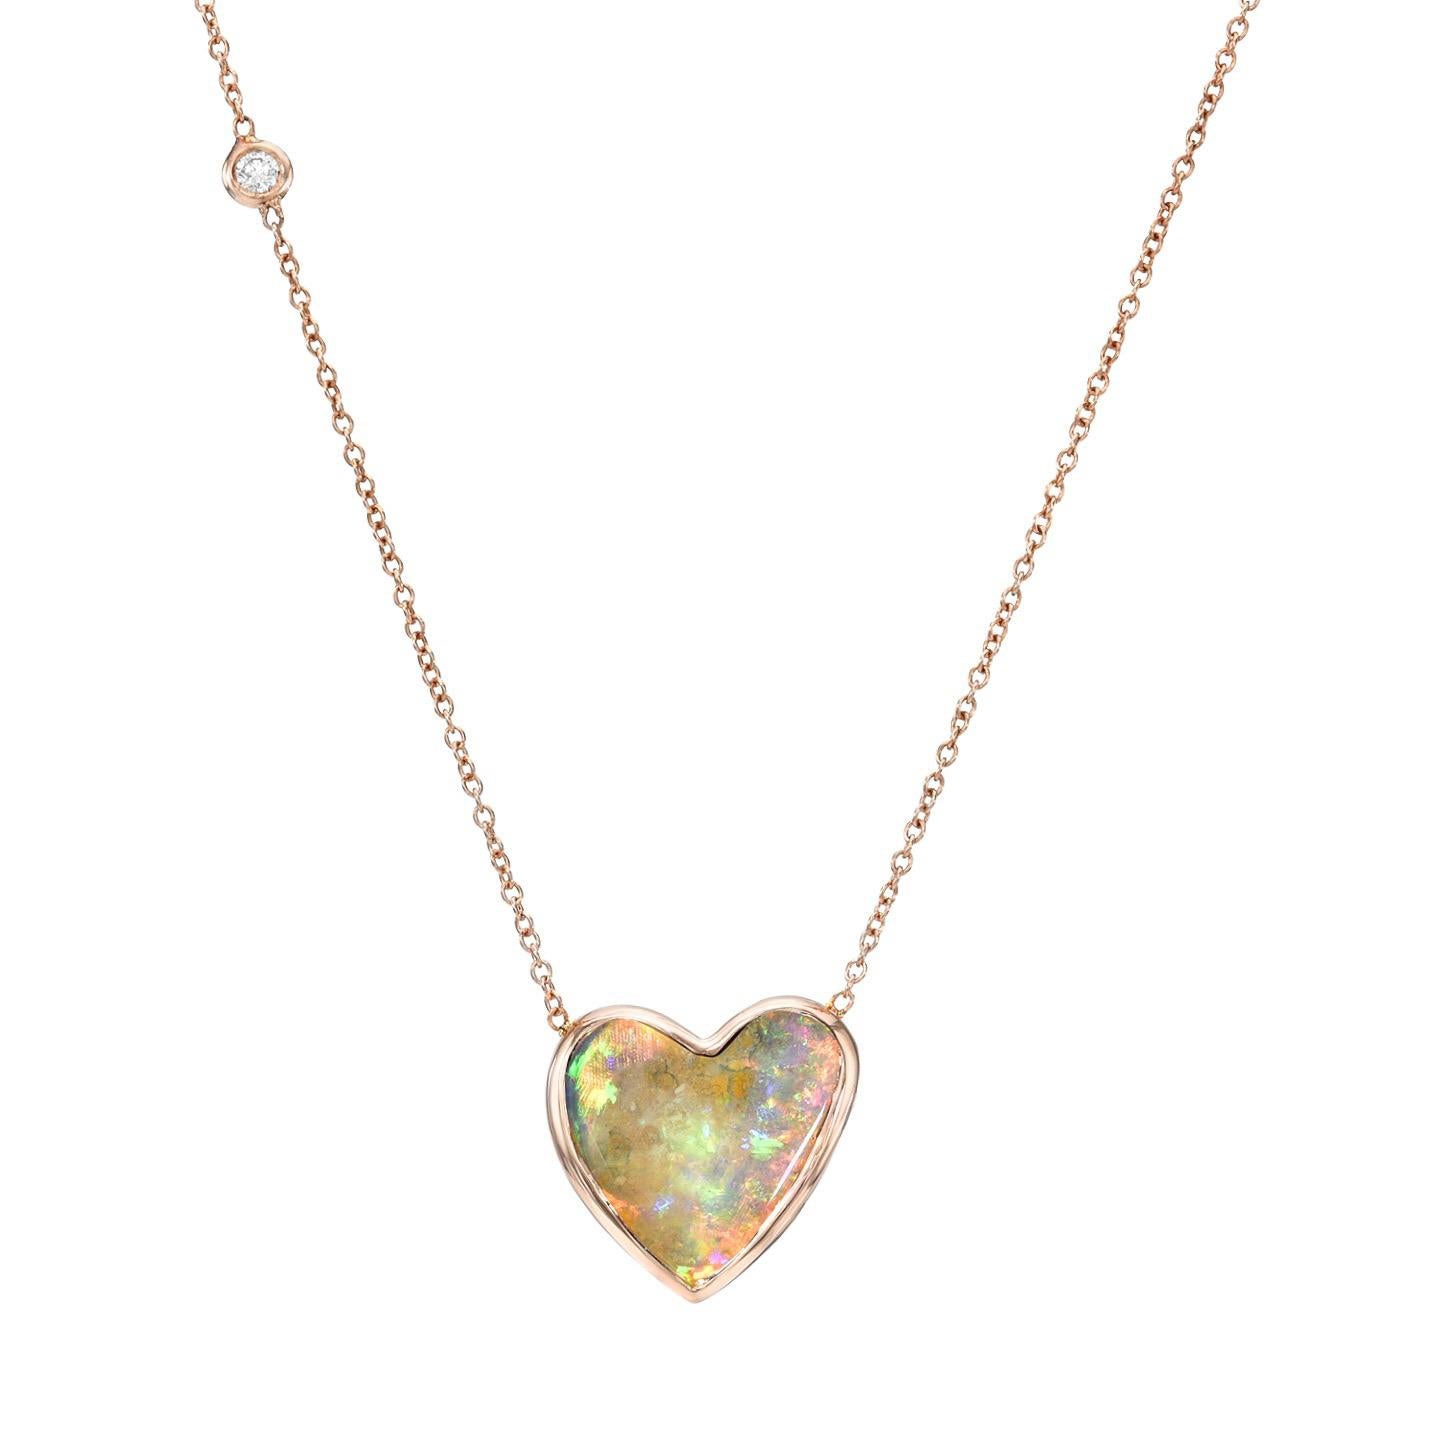 An opal heart charged with color, flashes from this Australian Opal Necklace. Gleaming from within its bezel setting, the Crystal Opal flaunts electric pinks, greens and blues. From behind the opal glows a rose gold plate with a heart-shaped cutout